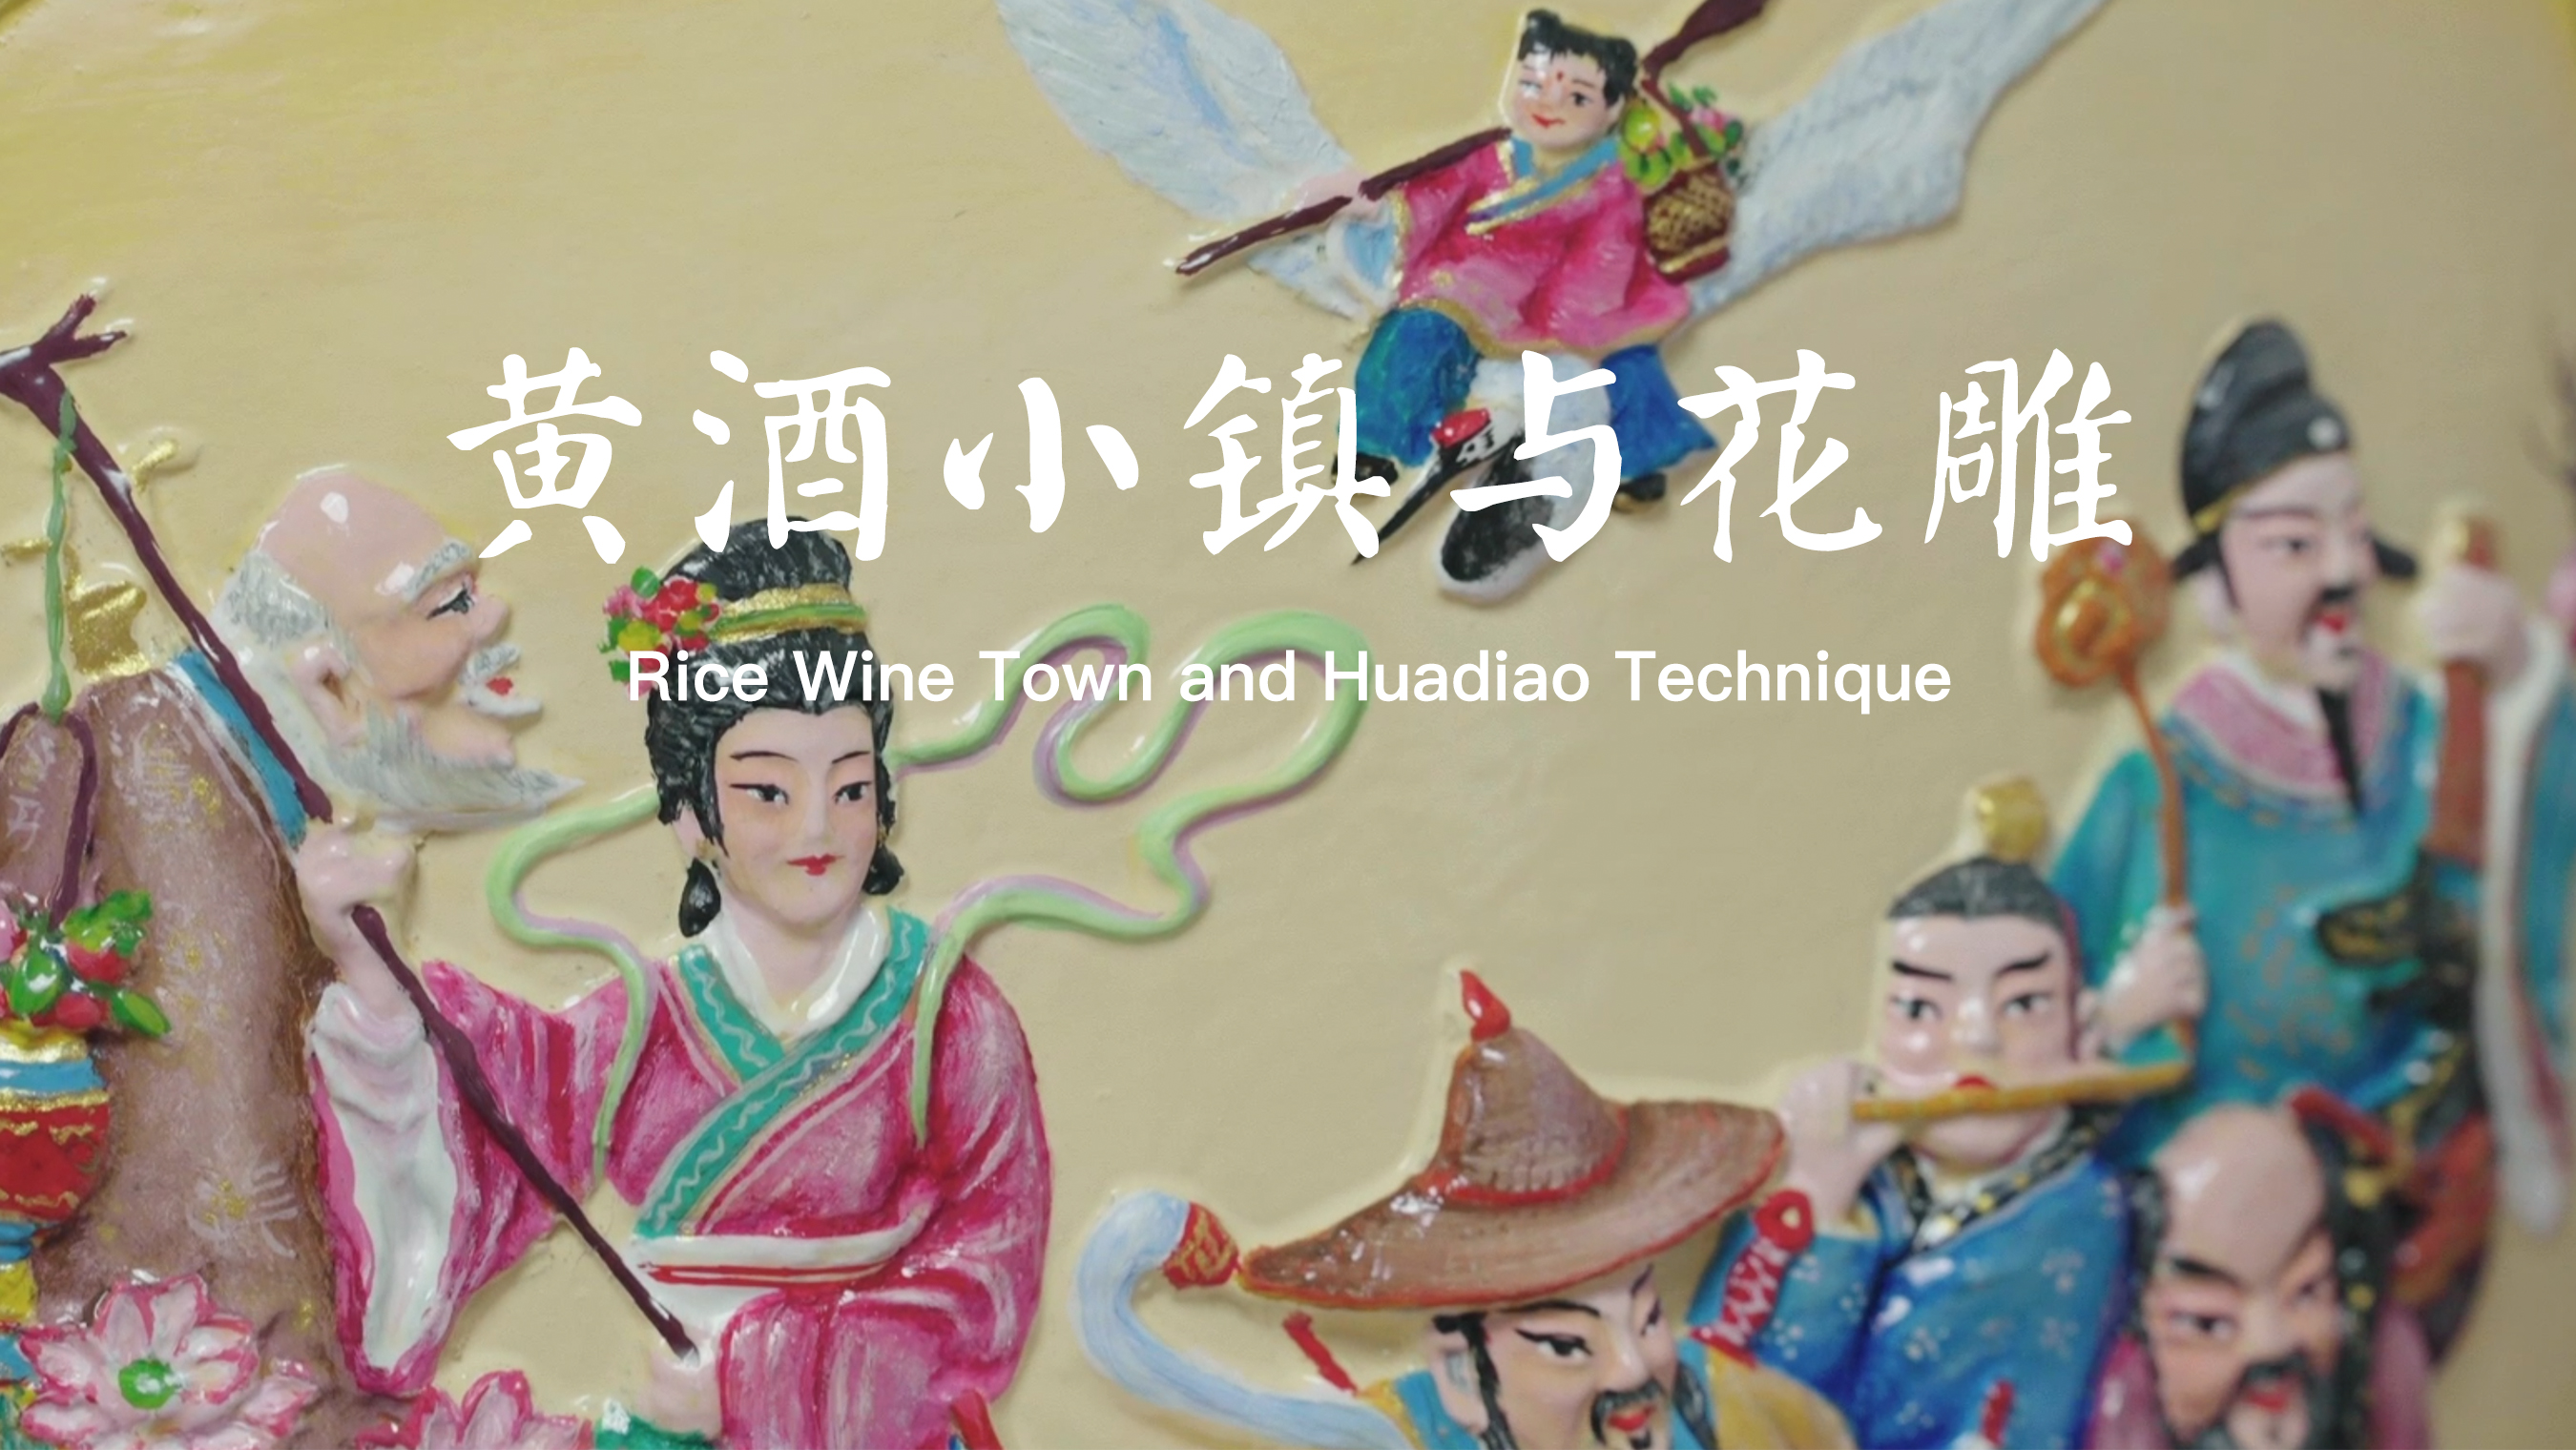 Rice Wine Town and Huadiao Technique